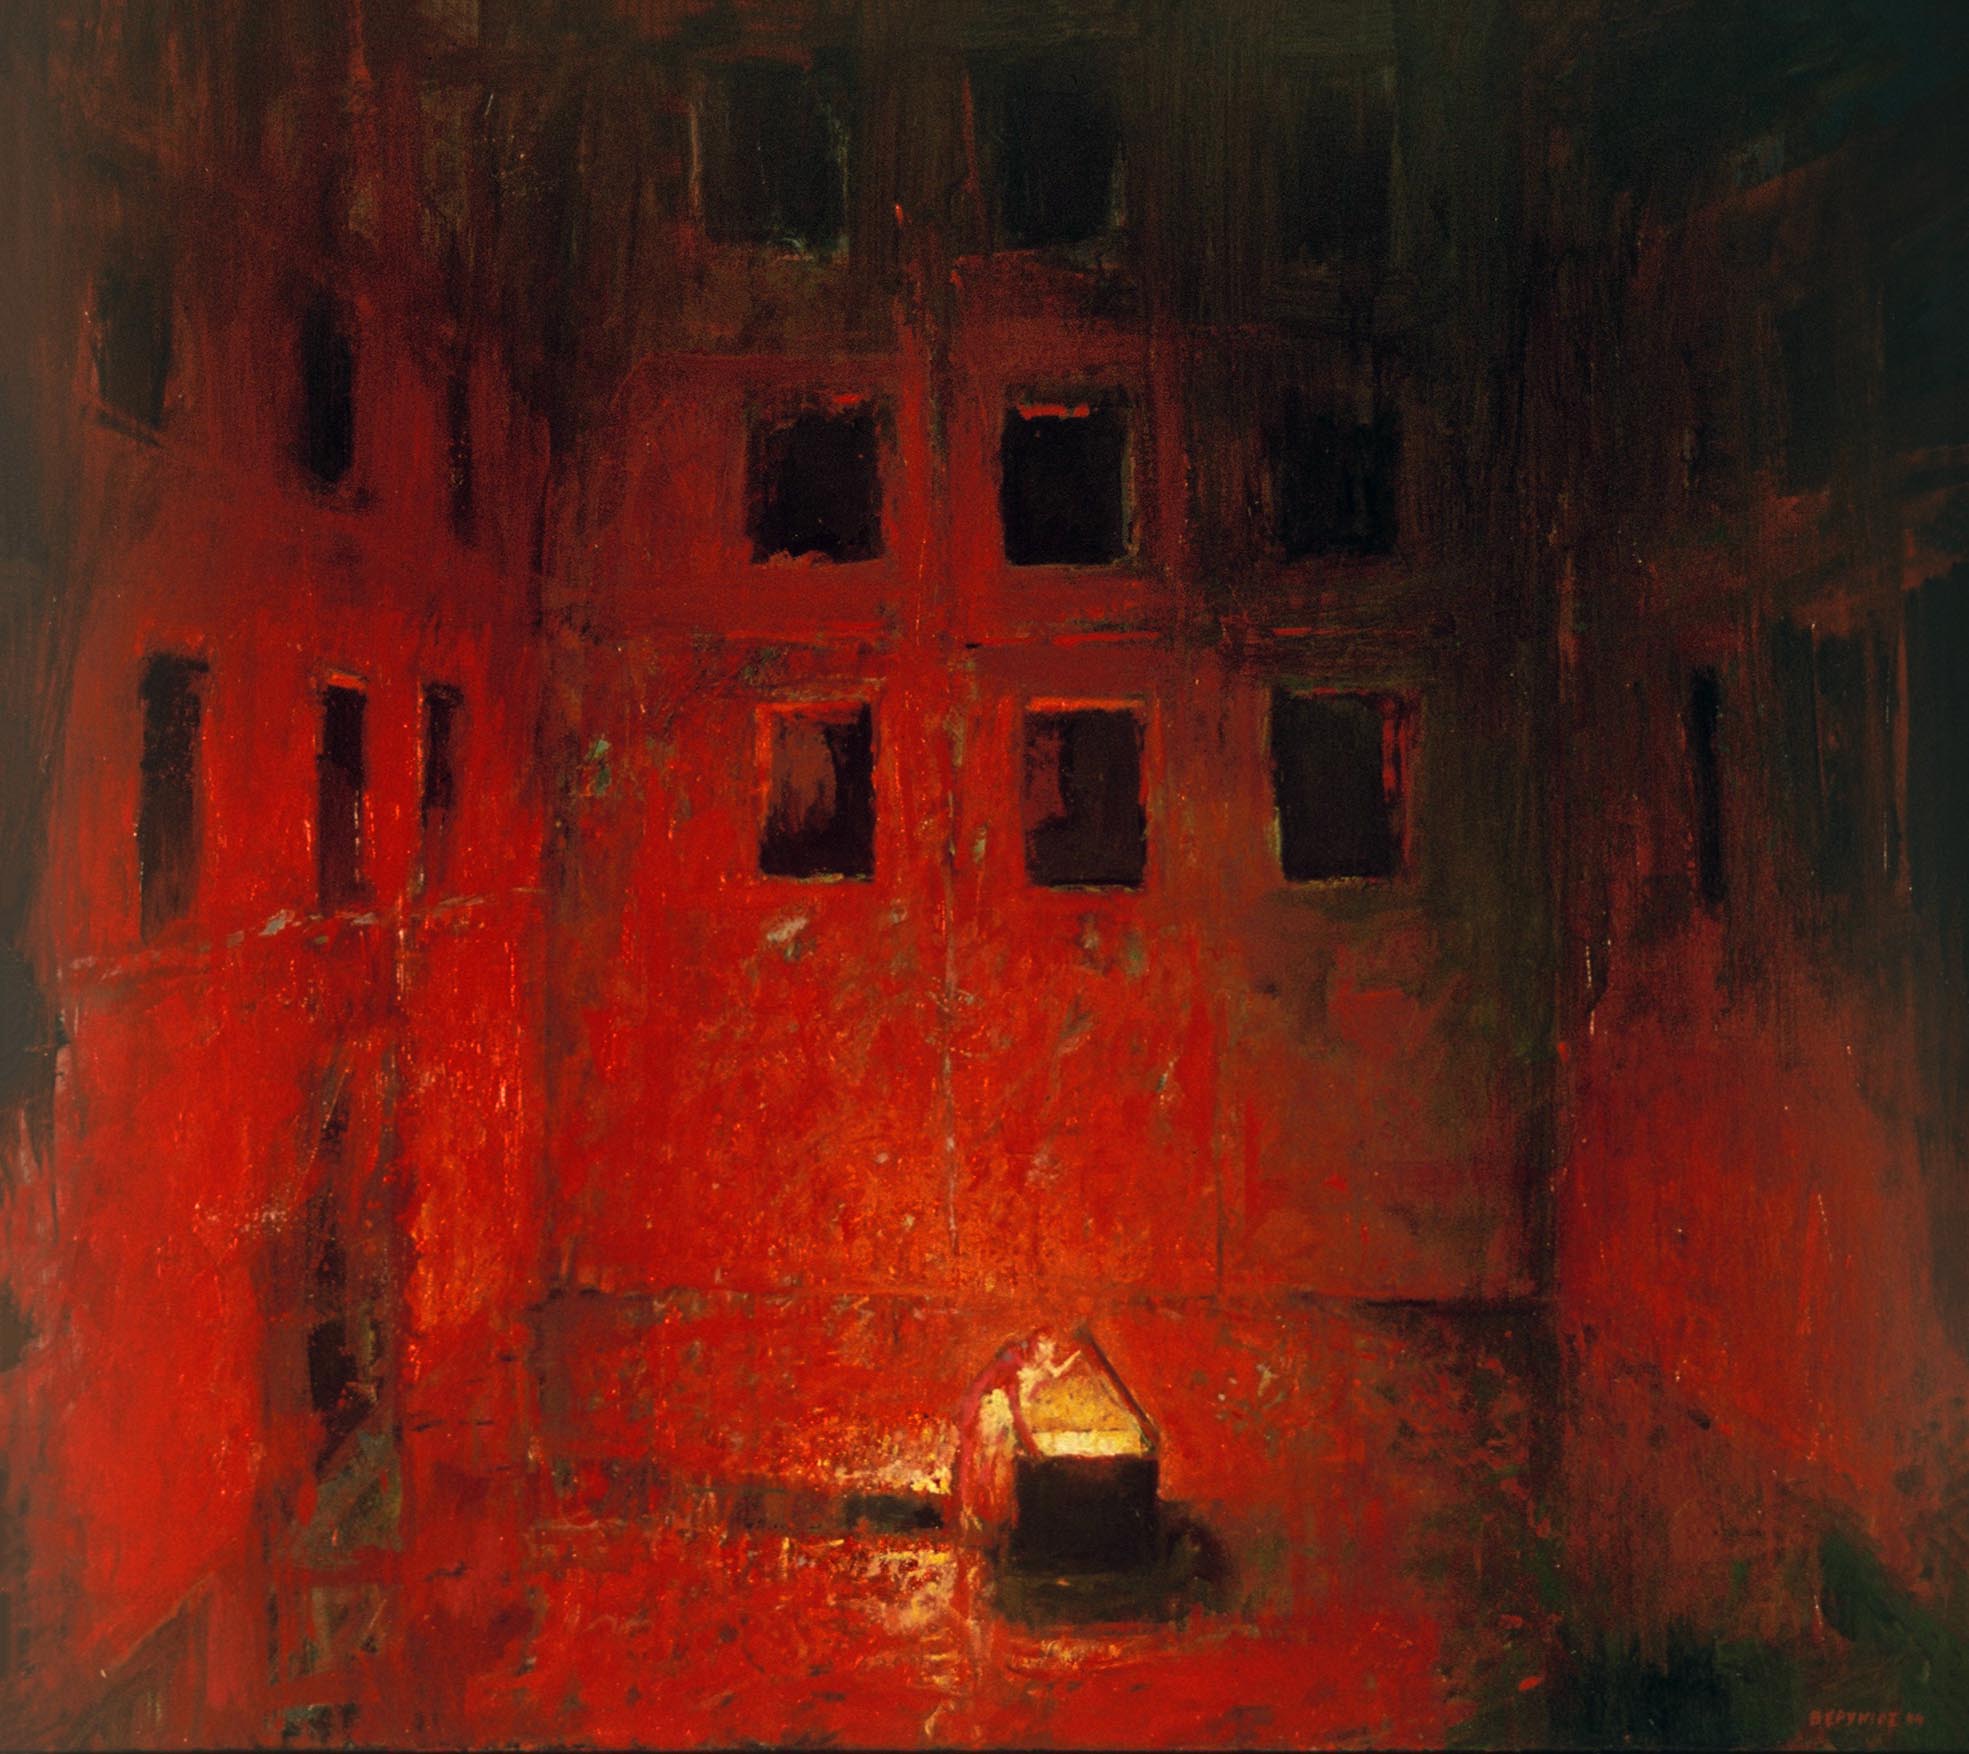 "Untitled", 1996, Oil on canvas, 0,50 cm X 0,70 m